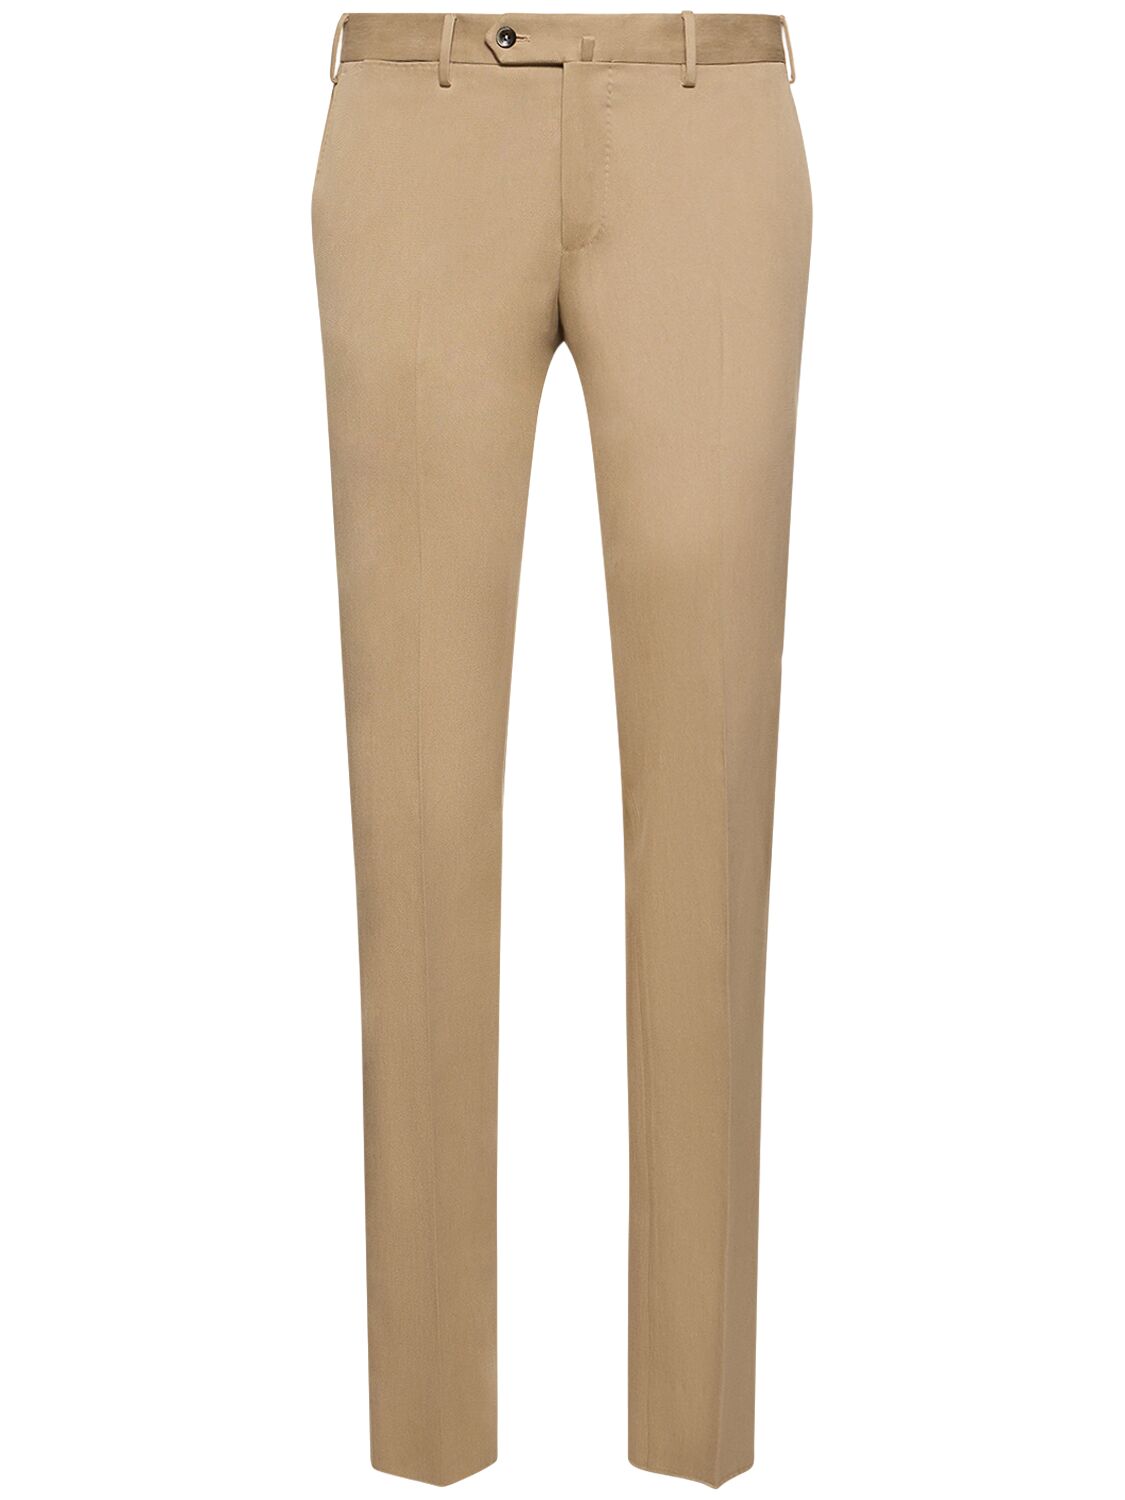 Pt Torino Classic Cotton Blend Straight Trousers In Beige